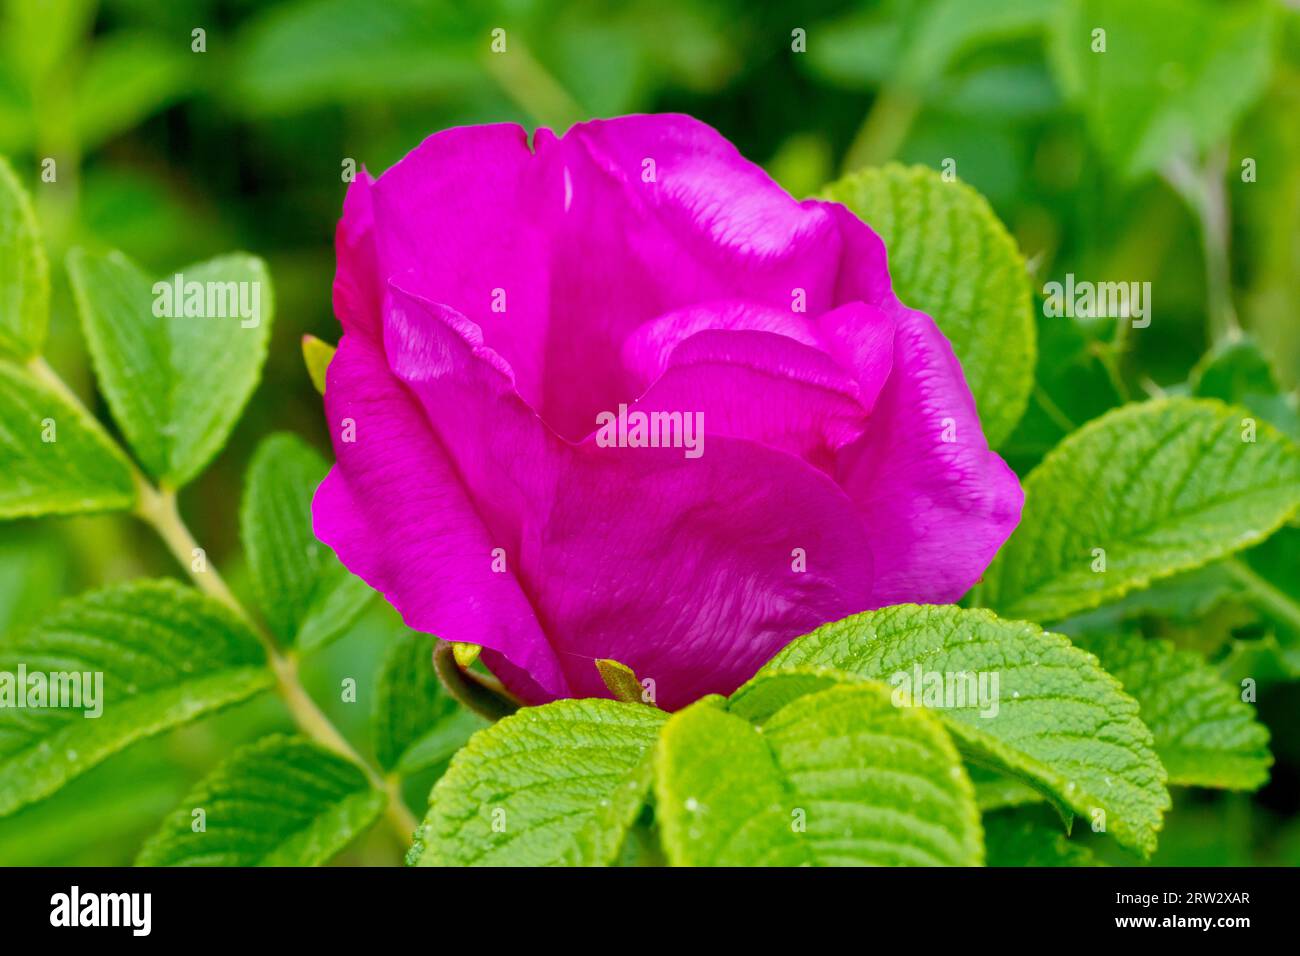 Wild Rose or Japanese Rose (rosa rugosa rubra), close up showing a partially open rosebud of the commonly planted and wild shrub. Stock Photo